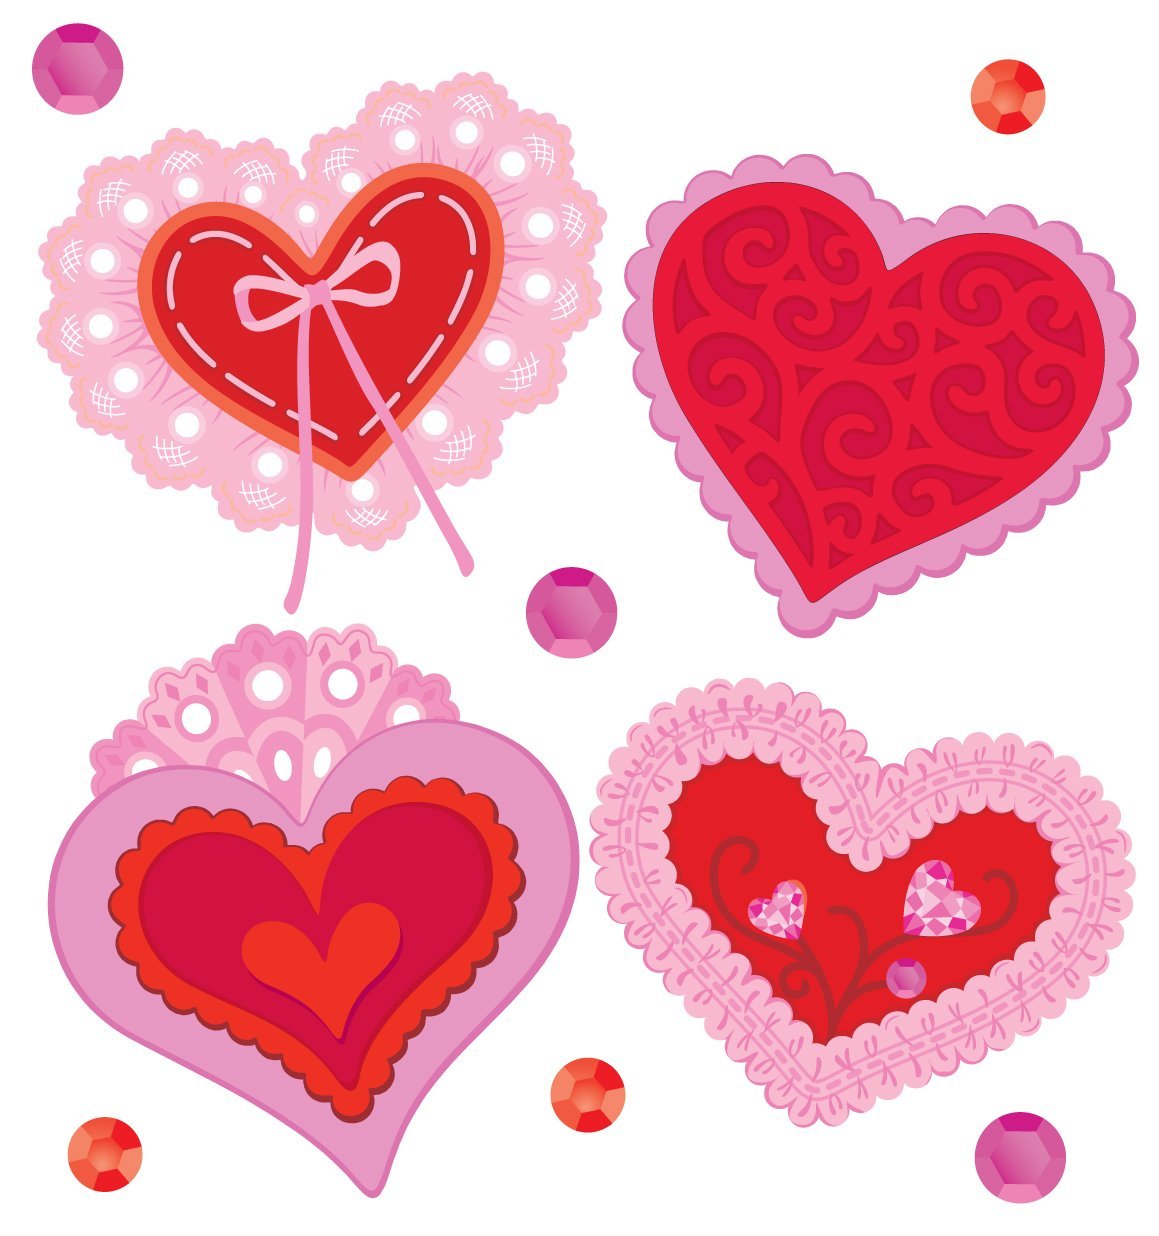 Jolee's Boutique Lace Hearts Dimensional Stickers